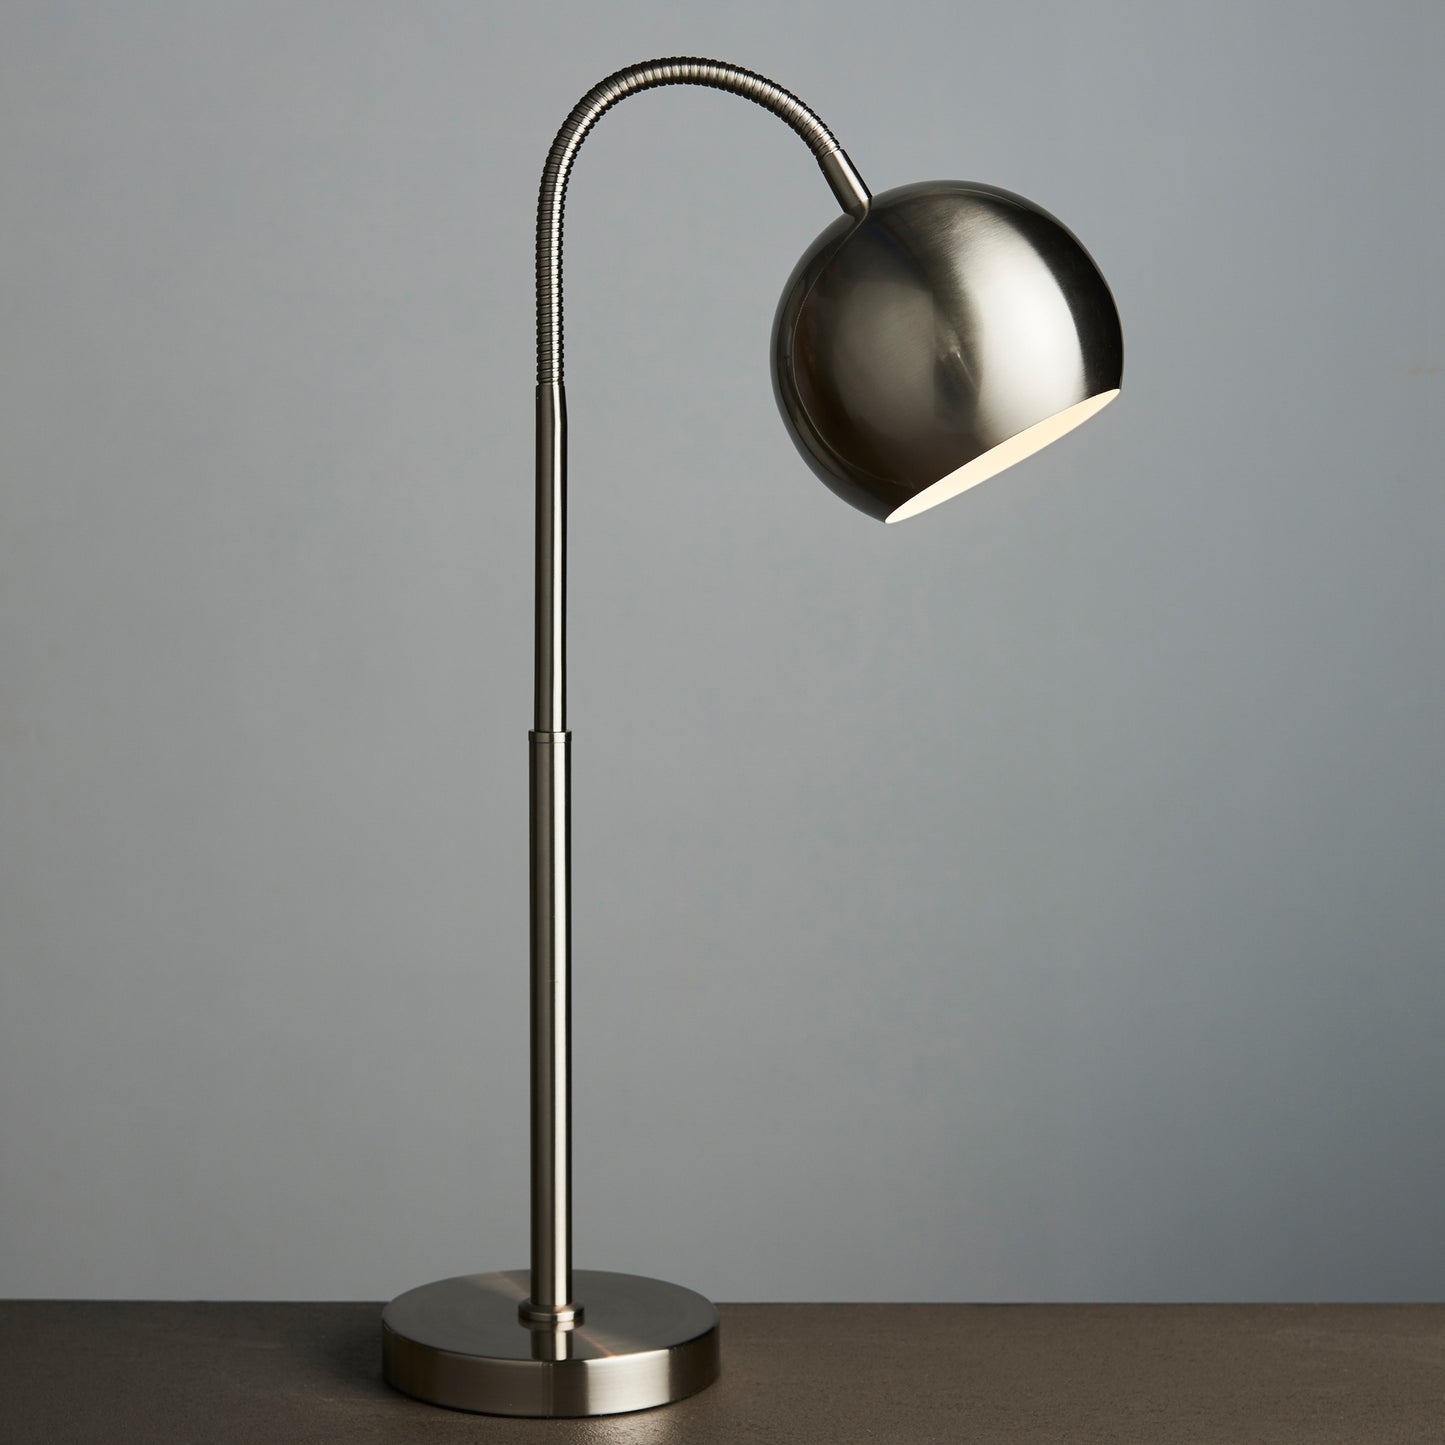 A Beesand Table Lamp Chrome with a metal base for interior decor from Kikiathome.co.uk.